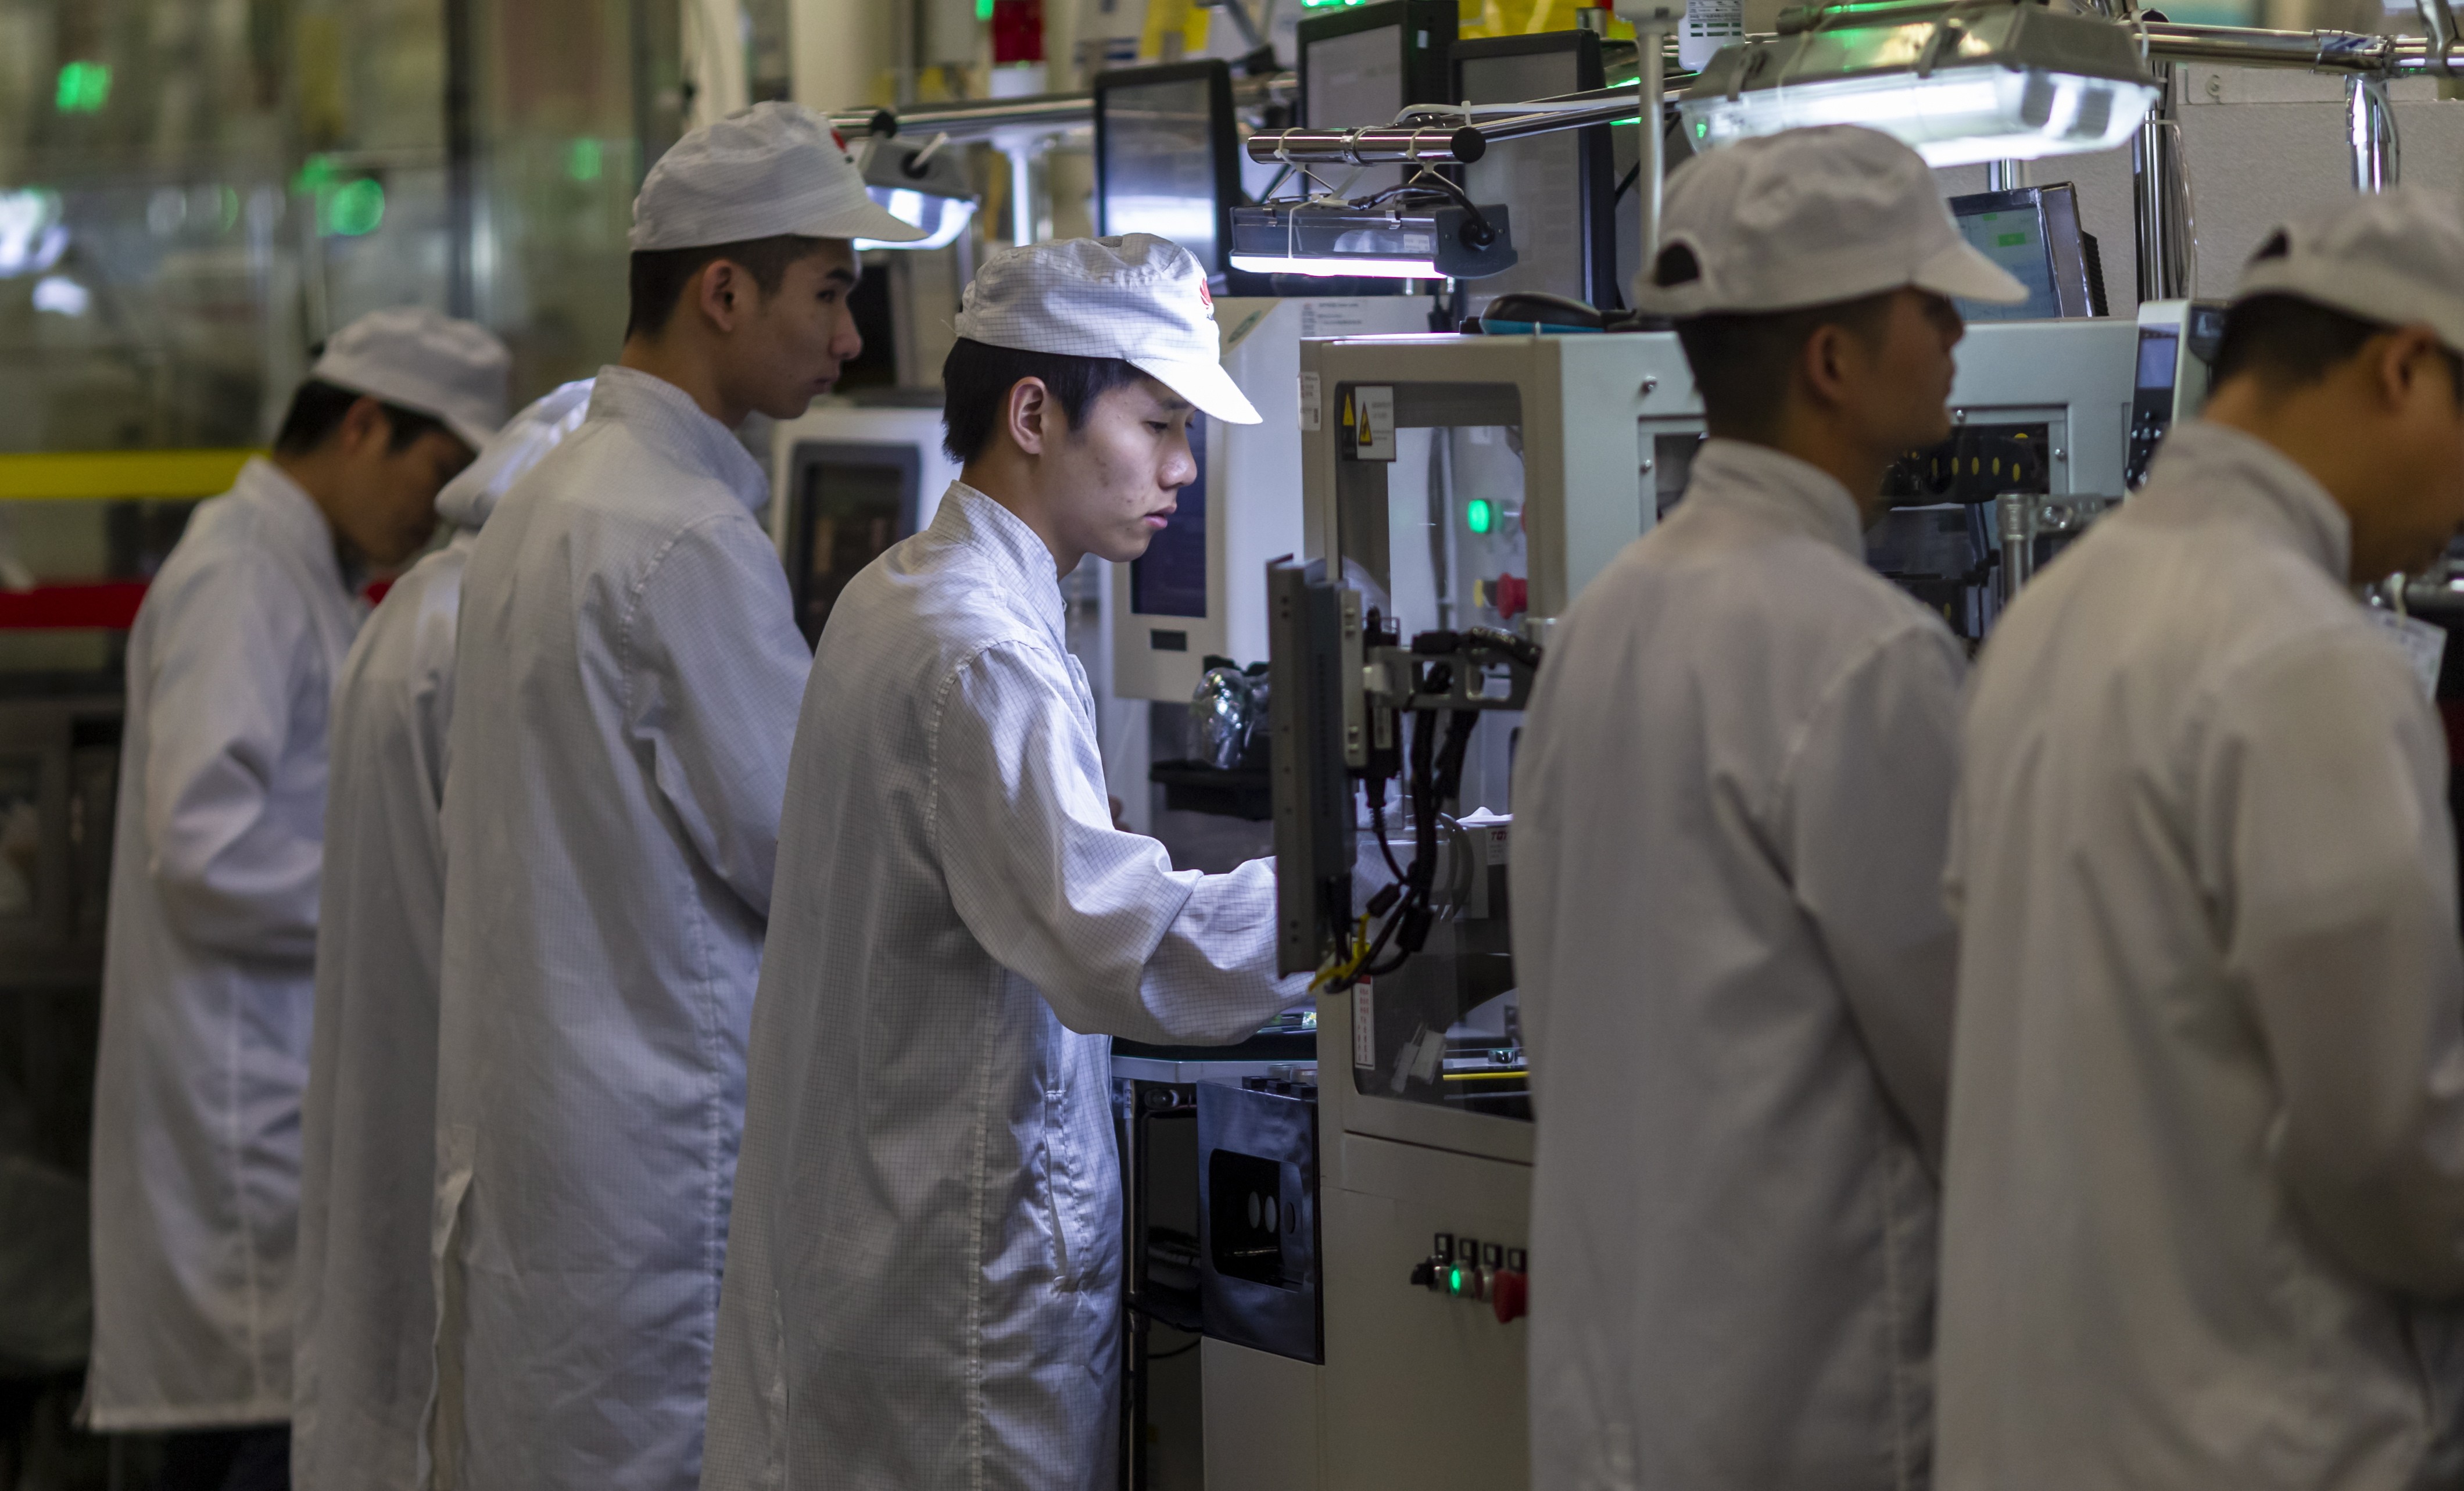 Men work at an assembly line in a factory of telecoms giant Huawei in Dongguan, Guangdong province, China, 2019. Photo: EPA-EFE